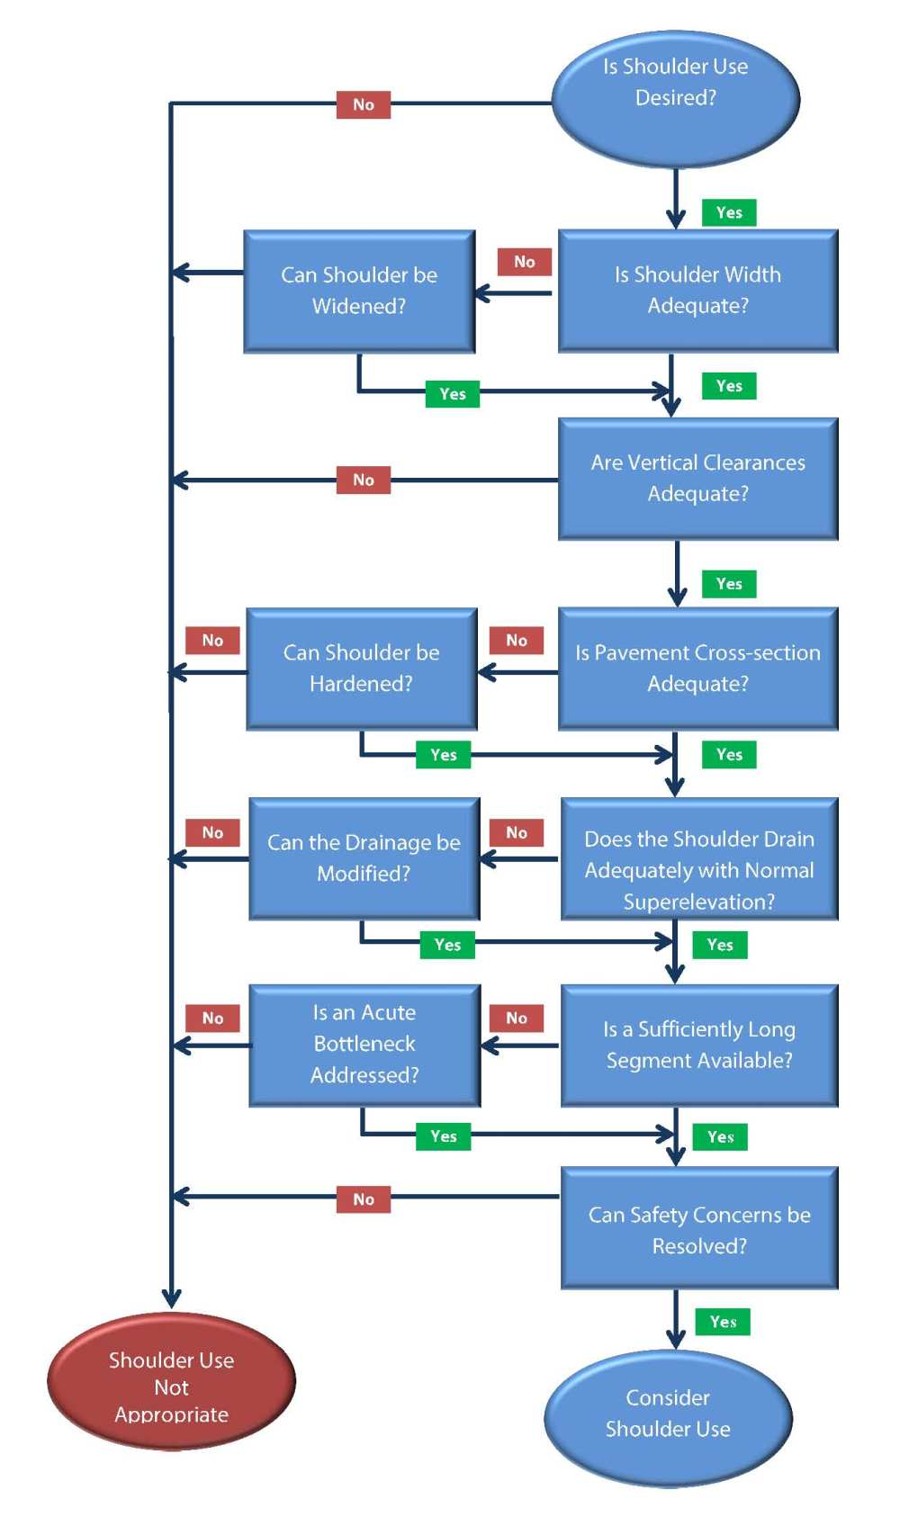 Flowchart depicting a decision tree for implementing part-time shoulder-use. Answers of ‘no’ to the following questions result in shoulder use not being appropriate: 1.) Is shoulder width adequate? If not, can it be widened? 2.) Are vertical clearances adequate? 3.) Is pavement cross-section adequate? If not, can the shoulder be hardened? 4.) Does the shoulder drain adequately with normal superelevation? In not, can the drainage be modified? 5.) Is a sufficiently long segment available? In not, is an acute bottleneck addressed? 6.) Can safety concerns be resolved? If ‘yes’ is answered to all of these questions, then shoulder use should be considered.